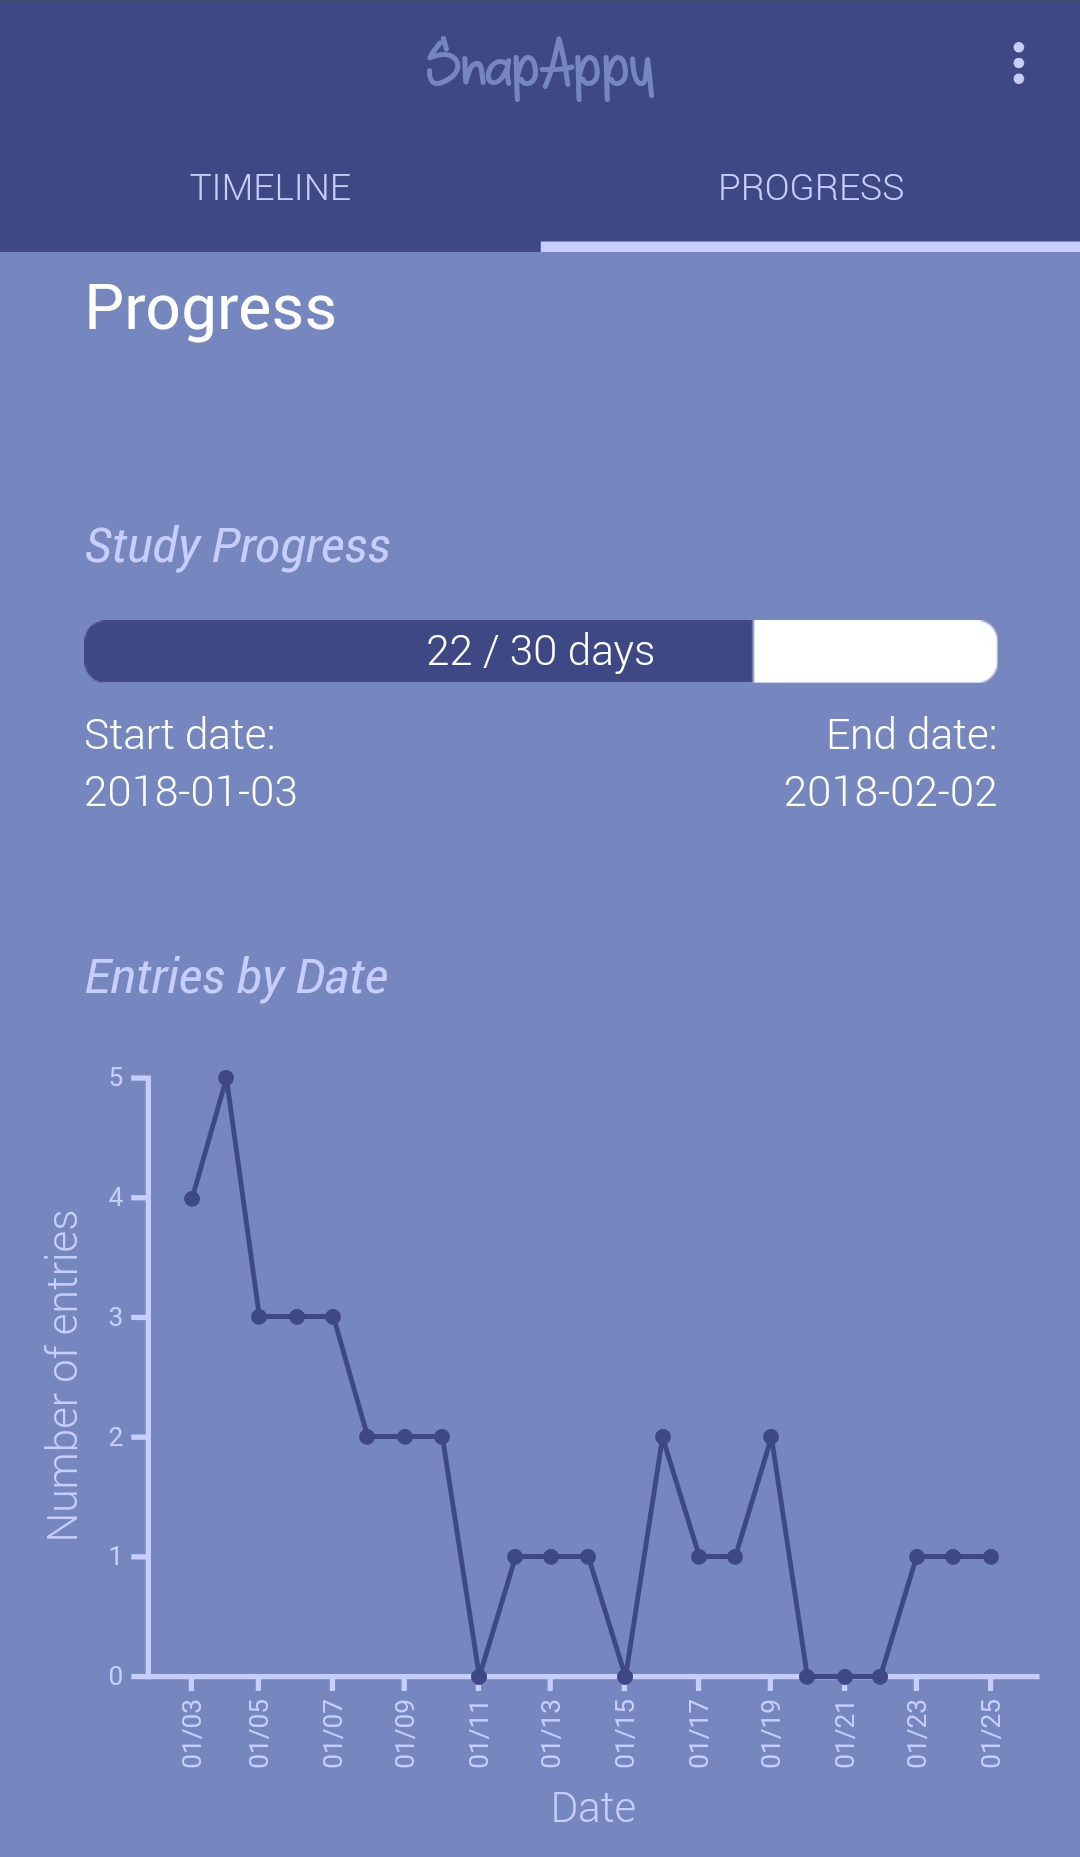 A progress bar displaying the number of days of the study the user has completed, and a line chart displaying the the number of entries per day.